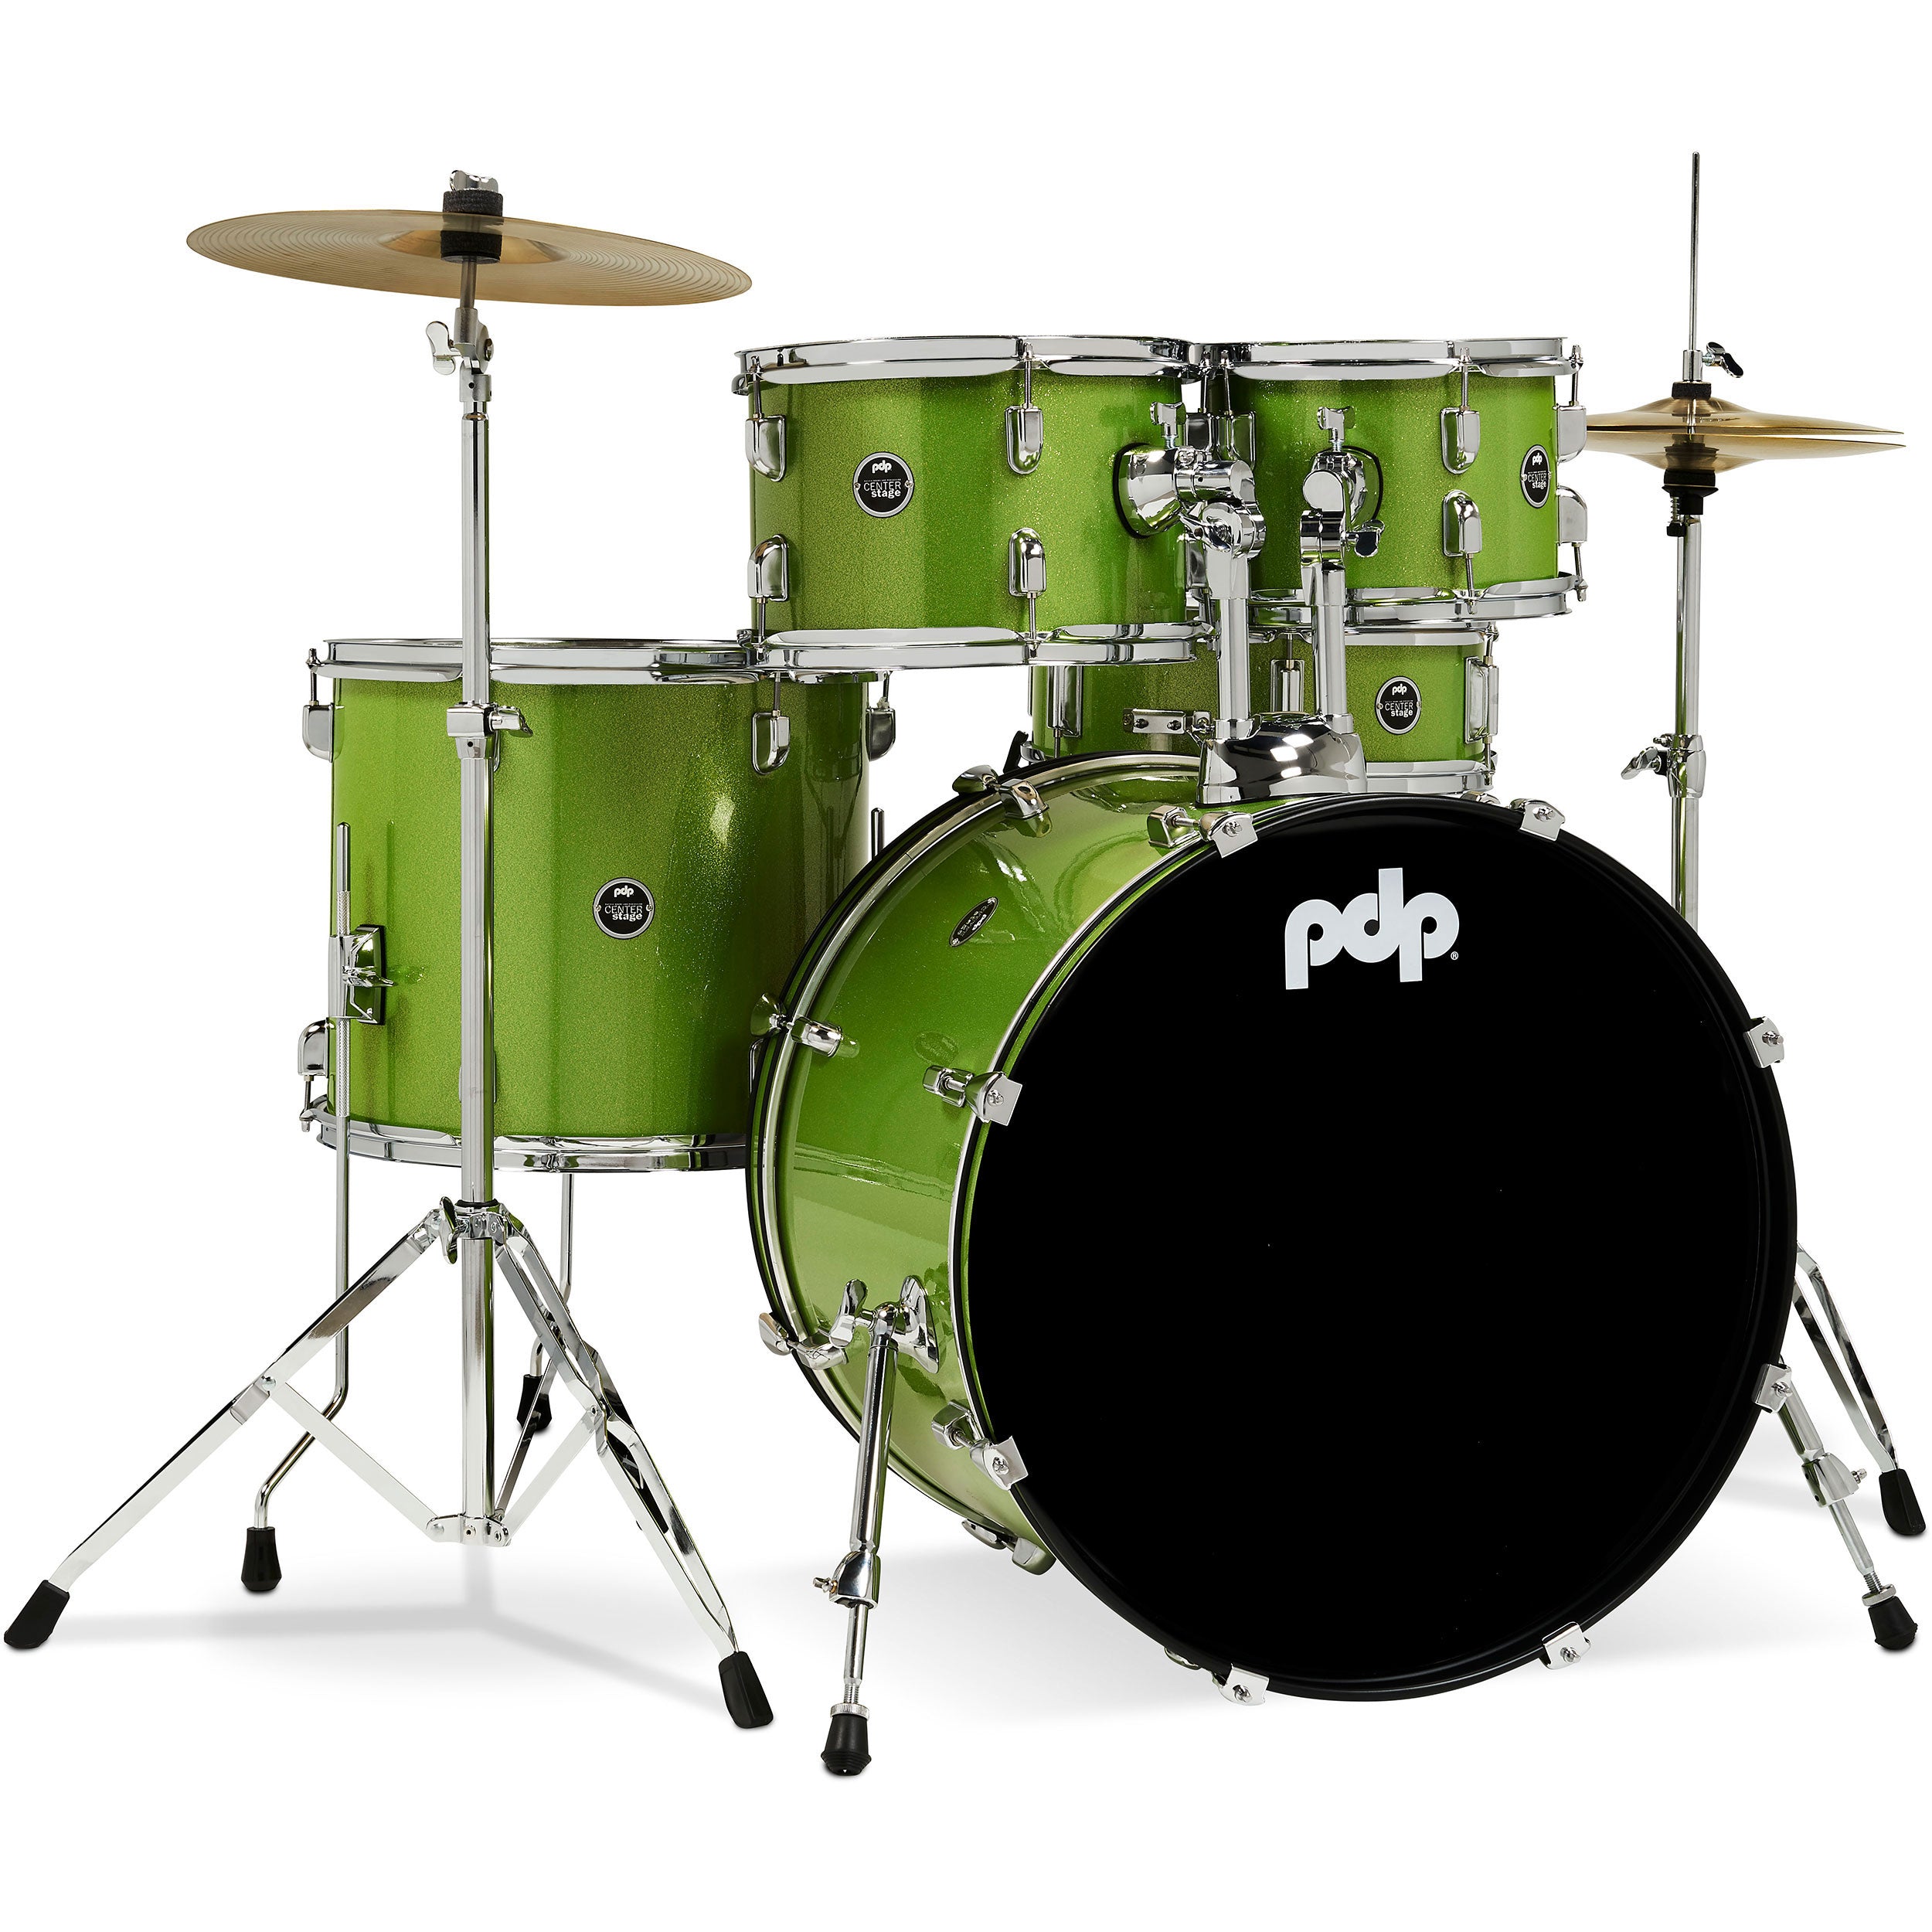 PDP Center Stage 5 Piece Complete Drum Kit - Green Sparkle